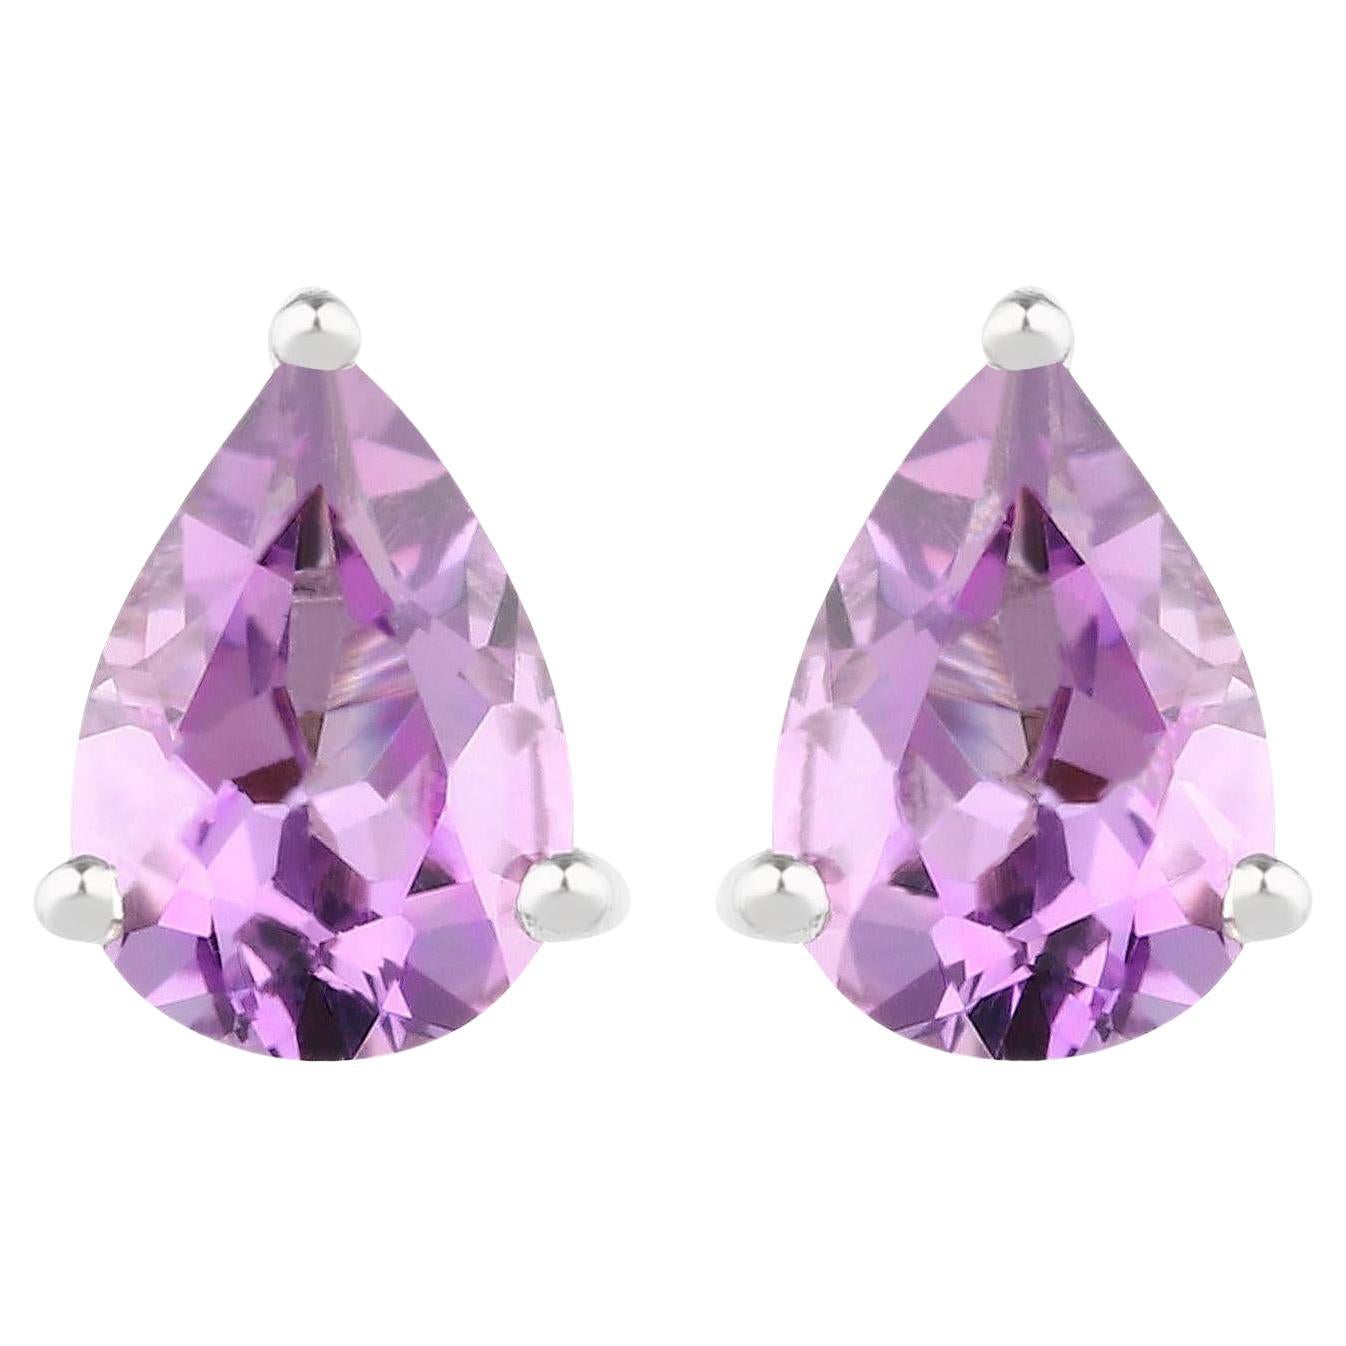 Pear Cut Amethyst Stud Earrings 1.25 Carats Rhodium Plated Sterling Silver For Sale